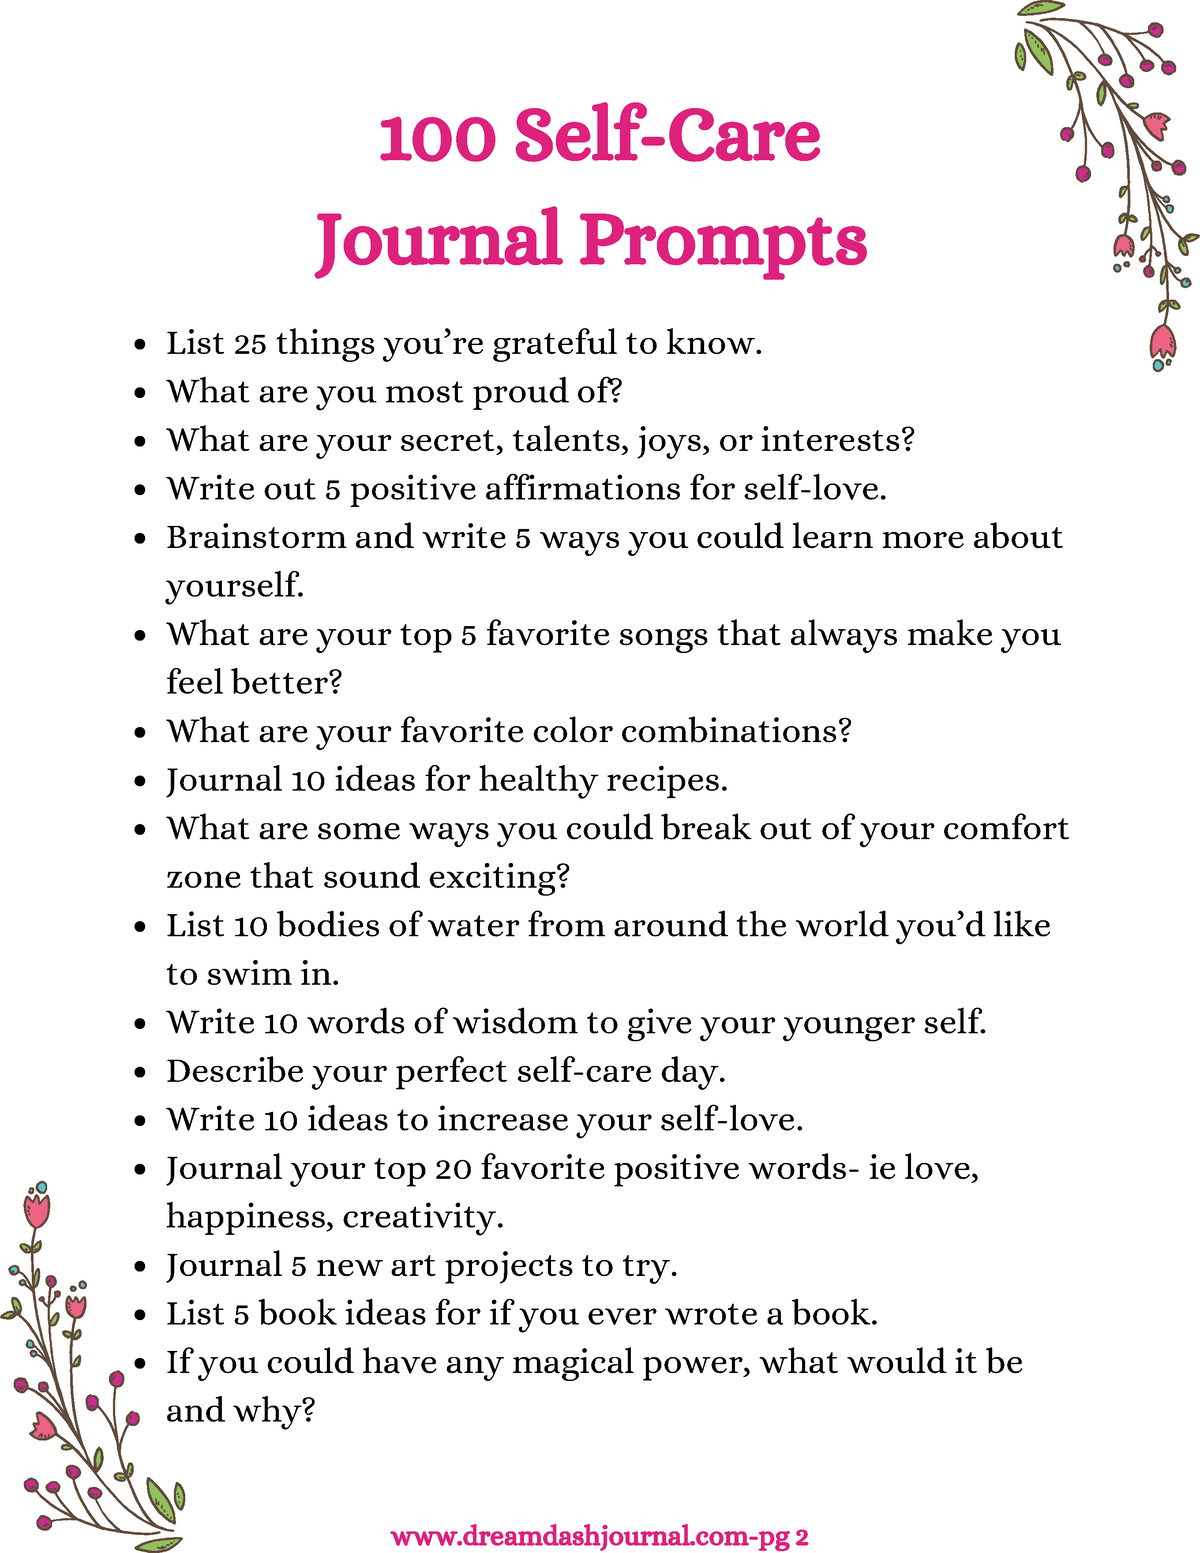 Self care journal prompts - Journal Prompts List 25 things you’re ...